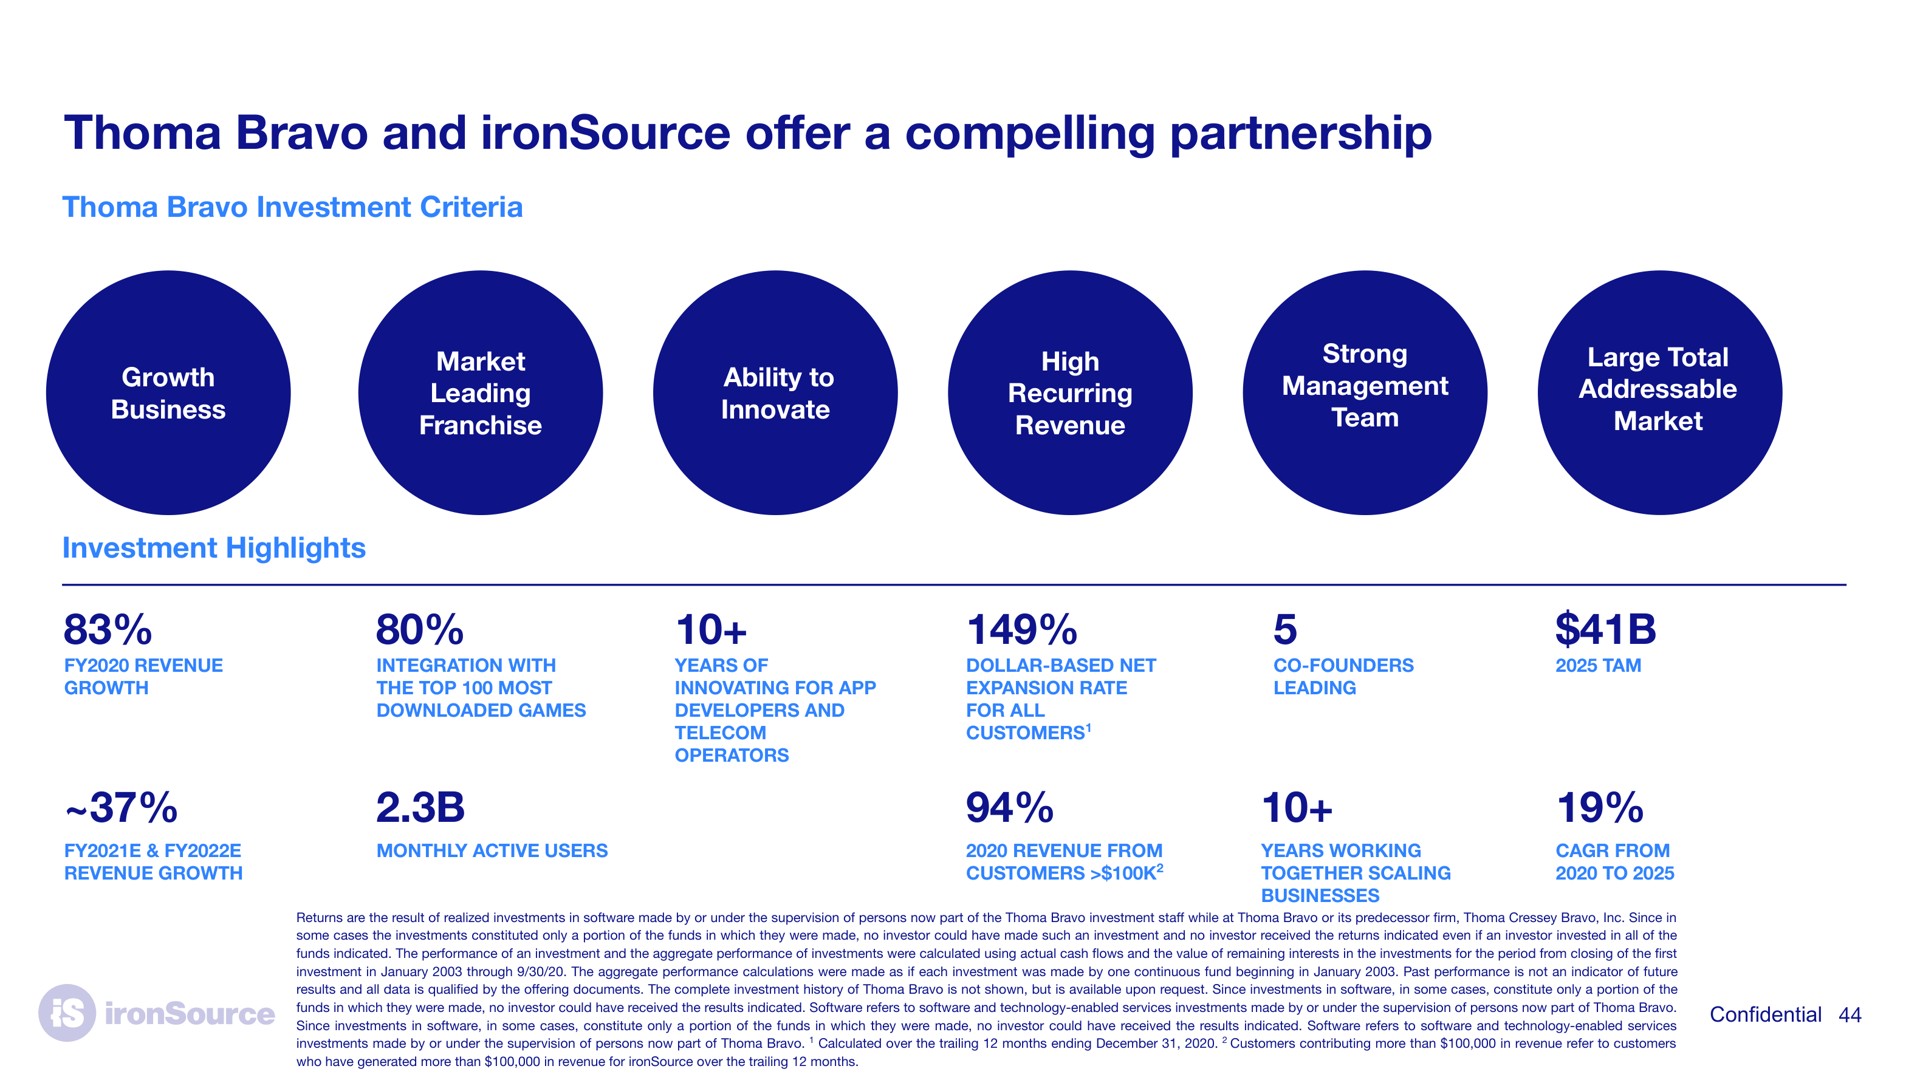 bravo and a compelling partnership offer | ironSource